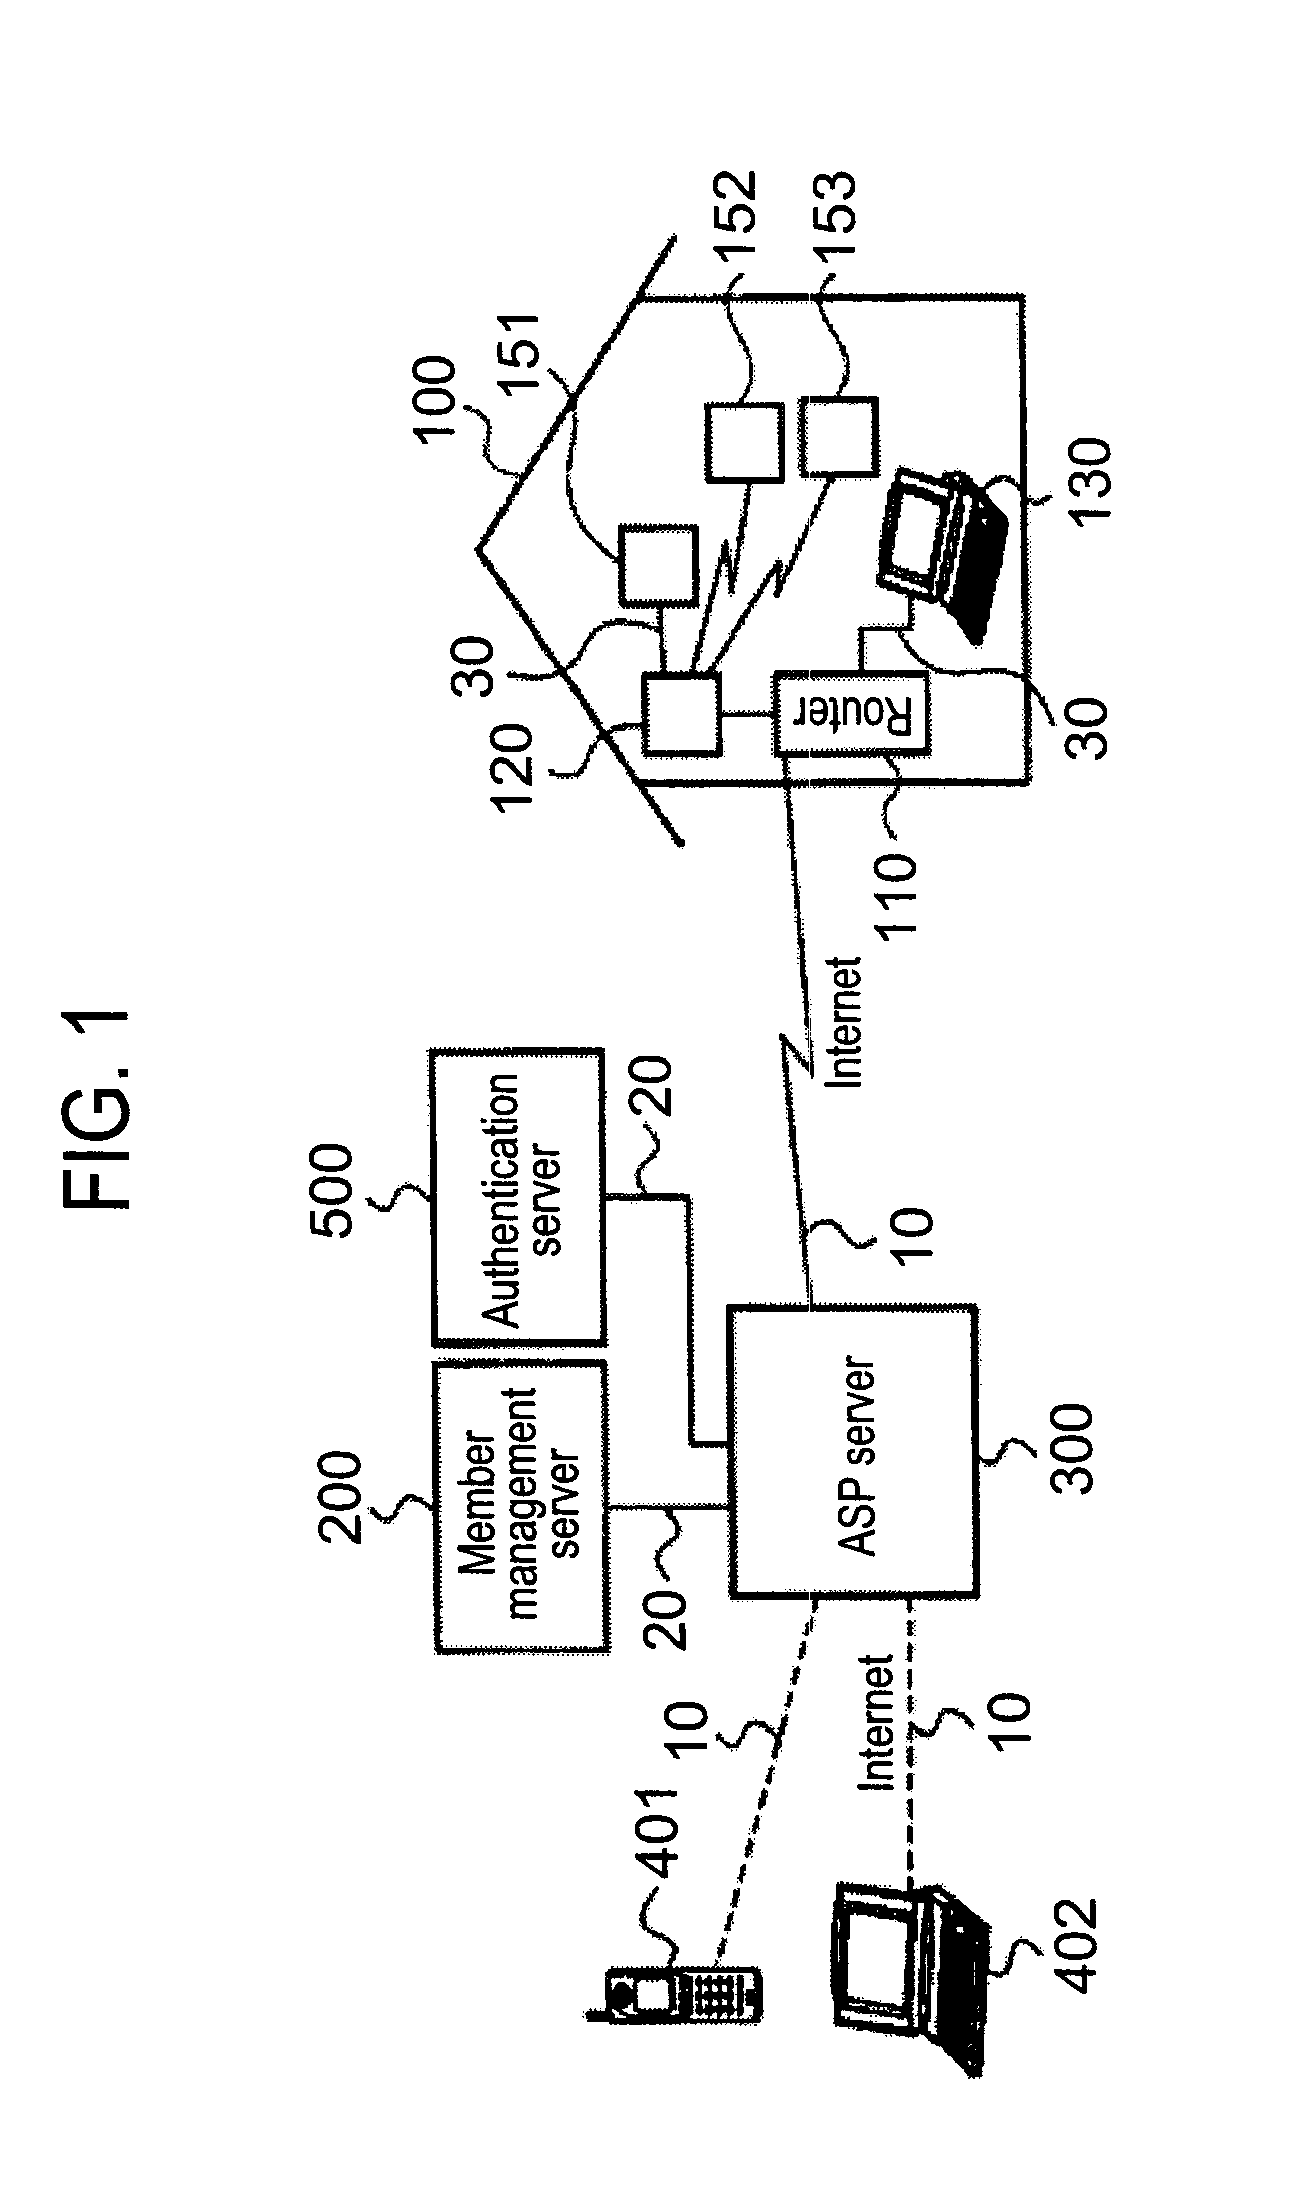 Control System For Networked Home Electrical Appliances